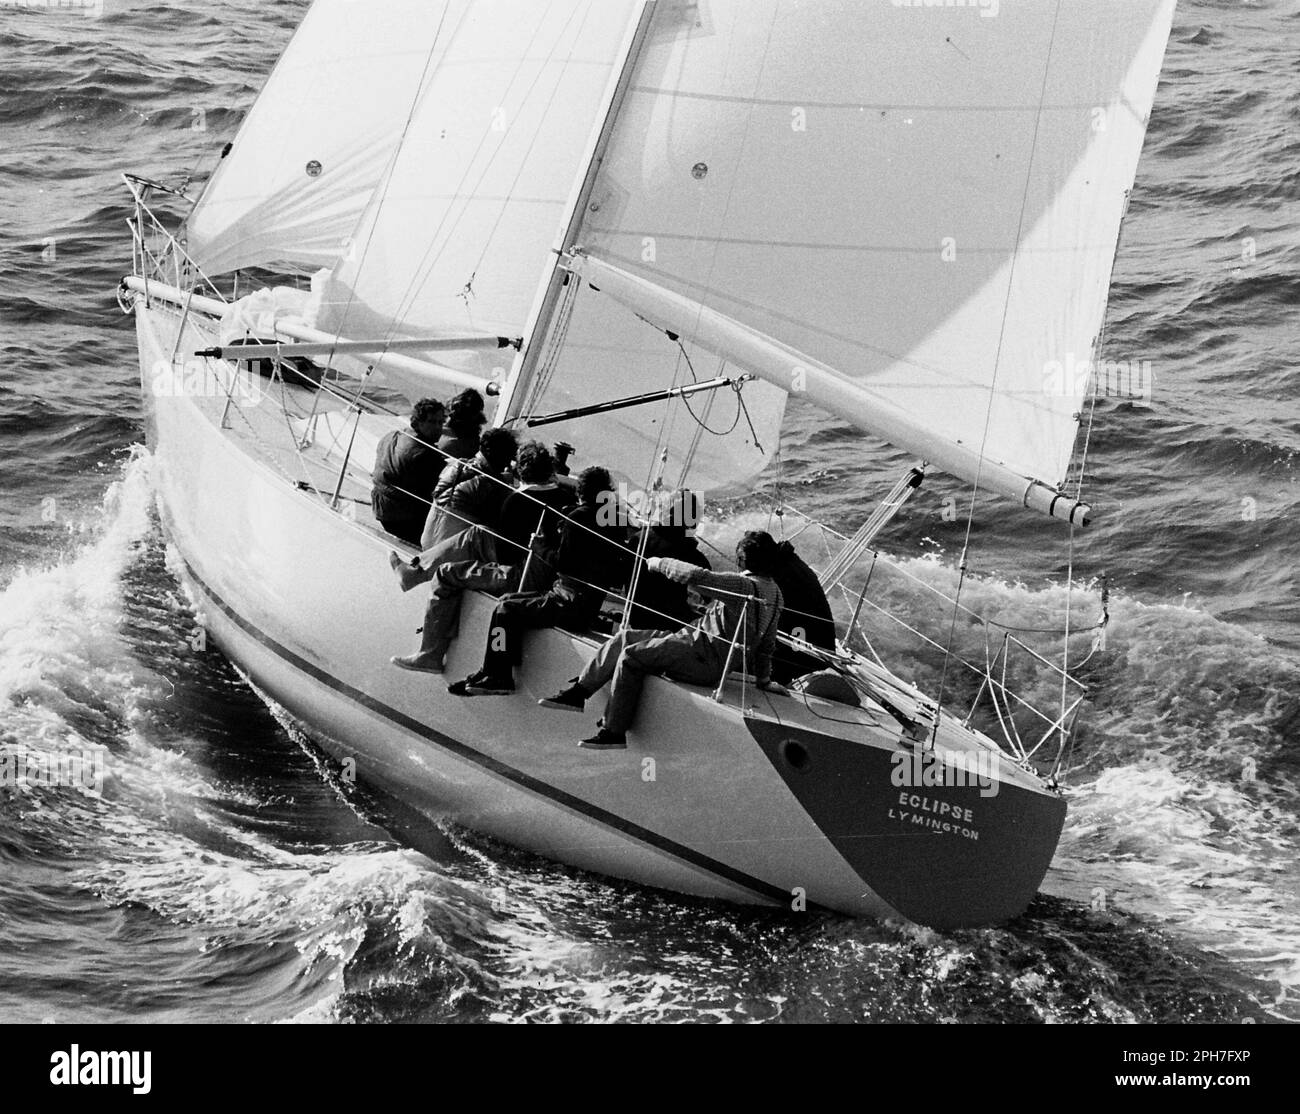 AJAXNETPHOTO. 16TH JUNE, 1979. CHANNEL, ENGLAND. - CONTESSA YACHTS FLYER - JEREMY ROGERS OF LYMINGTON BUILT ECLIPSE DURING THE ANNUAL ROUND THE ISLAND RACE. PHOTO:JONATHAN EASTLAND/AJAX REF:MX340 222904 43 Stock Photo